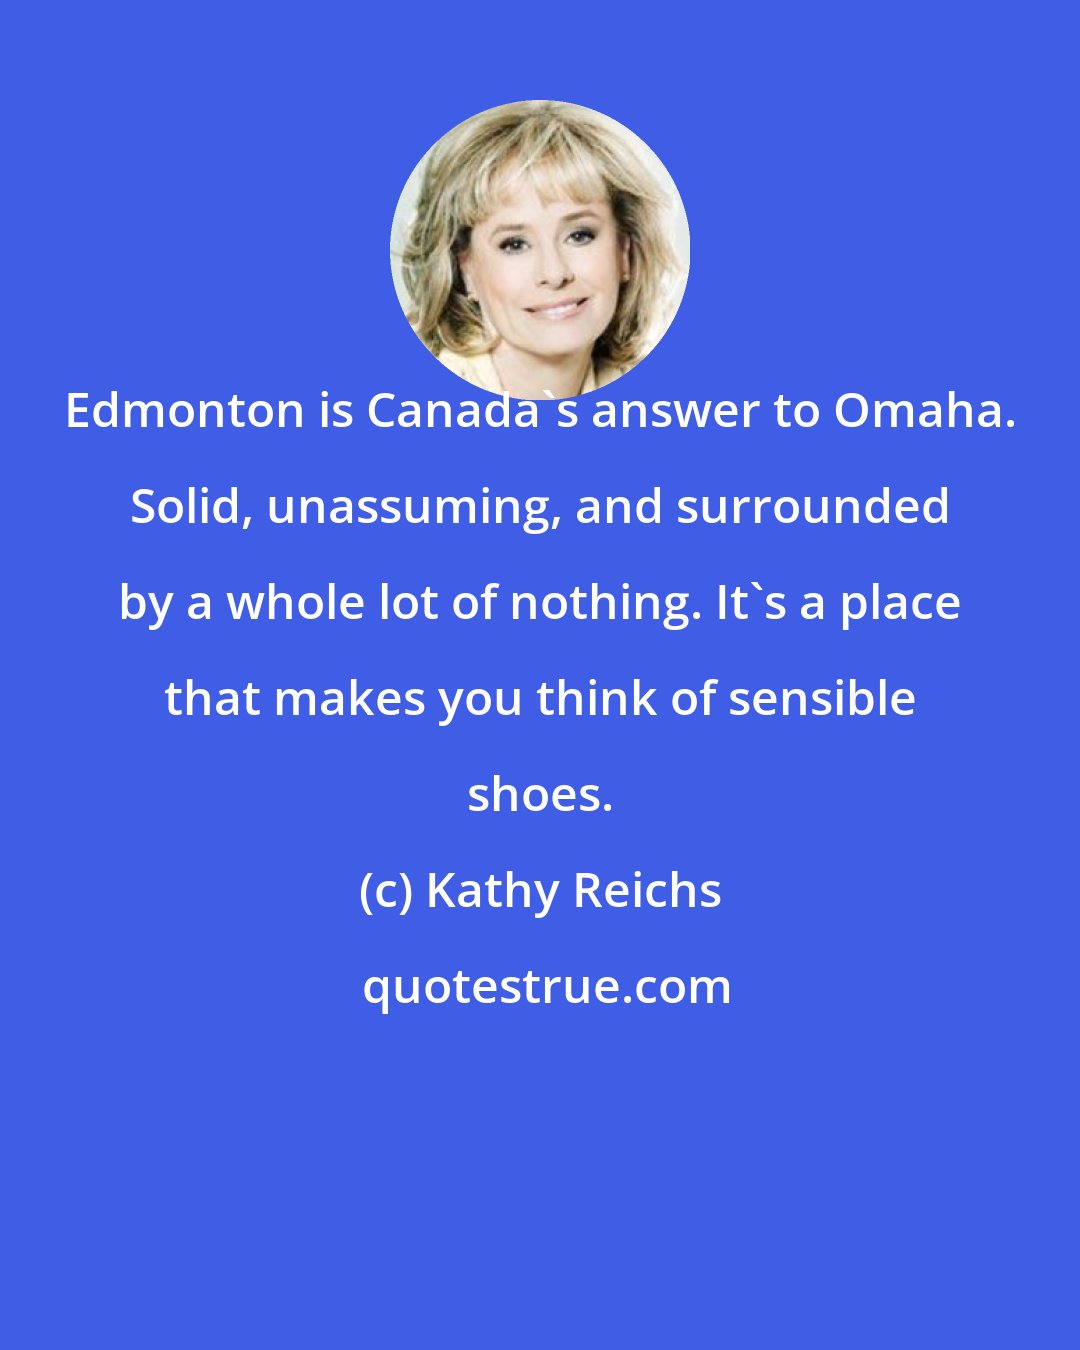 Kathy Reichs: Edmonton is Canada's answer to Omaha. Solid, unassuming, and surrounded by a whole lot of nothing. It's a place that makes you think of sensible shoes.